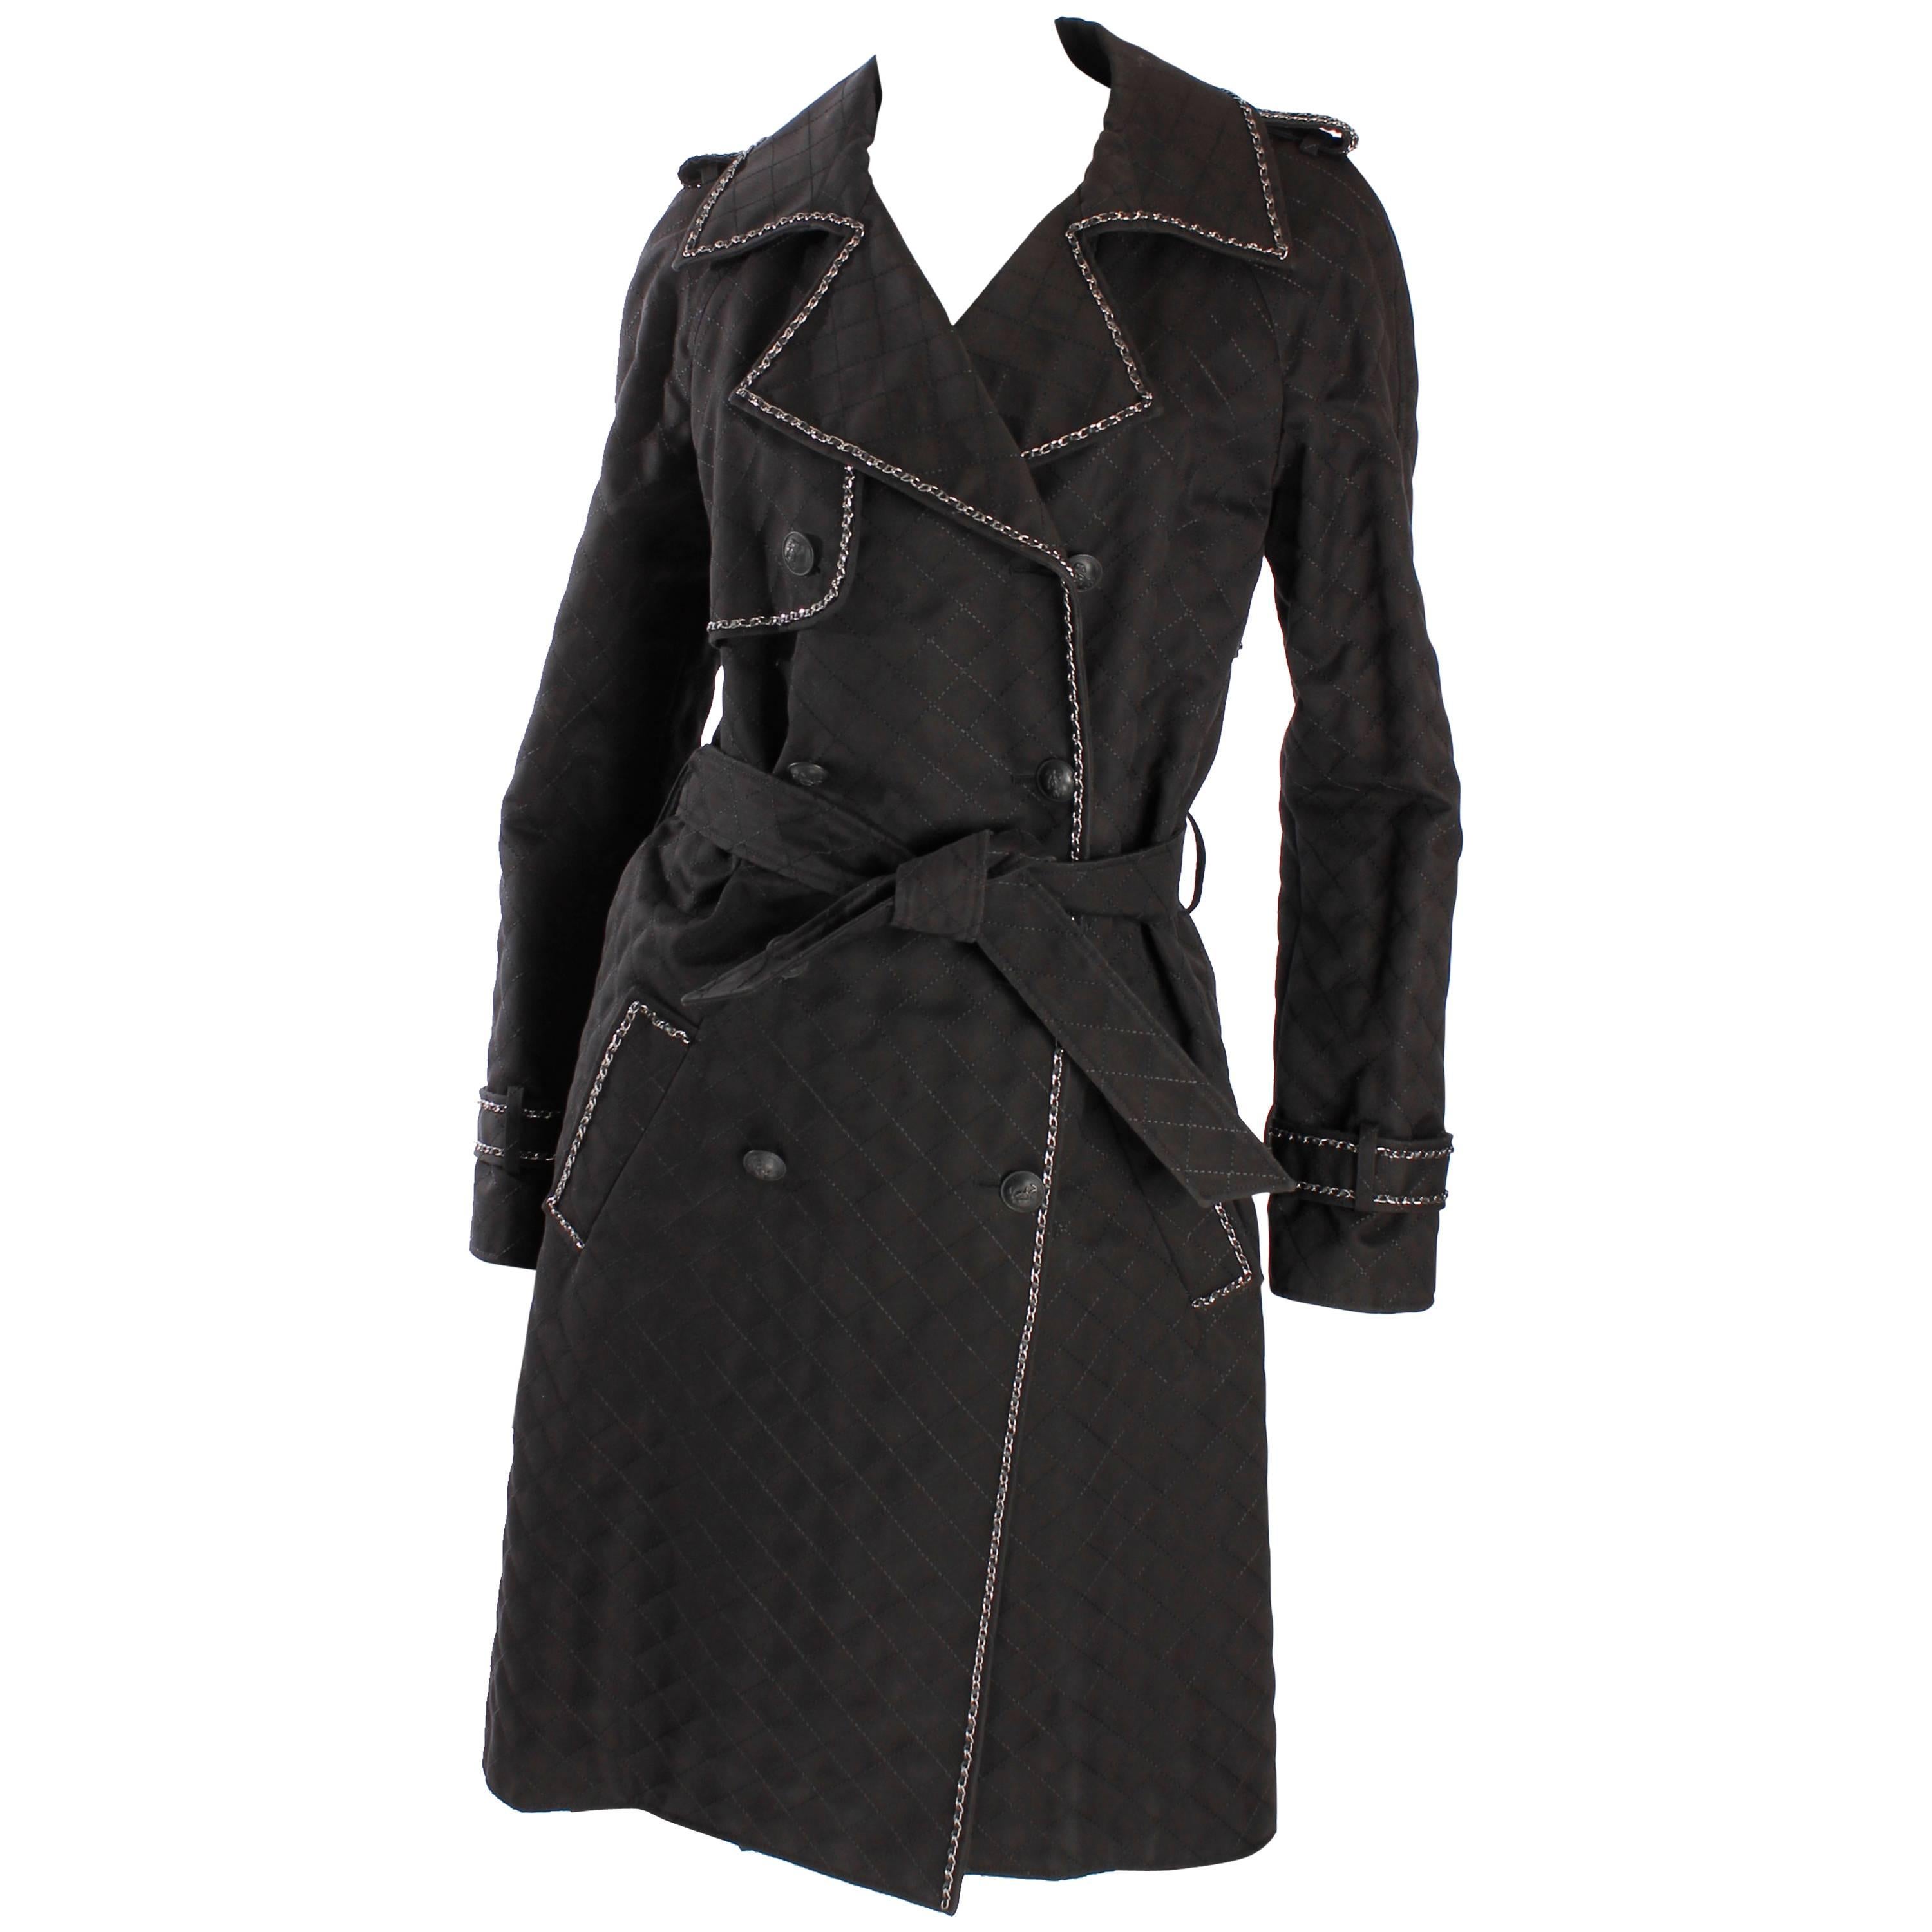 Chanel Trenchcoat - black/silver Runway For Sale